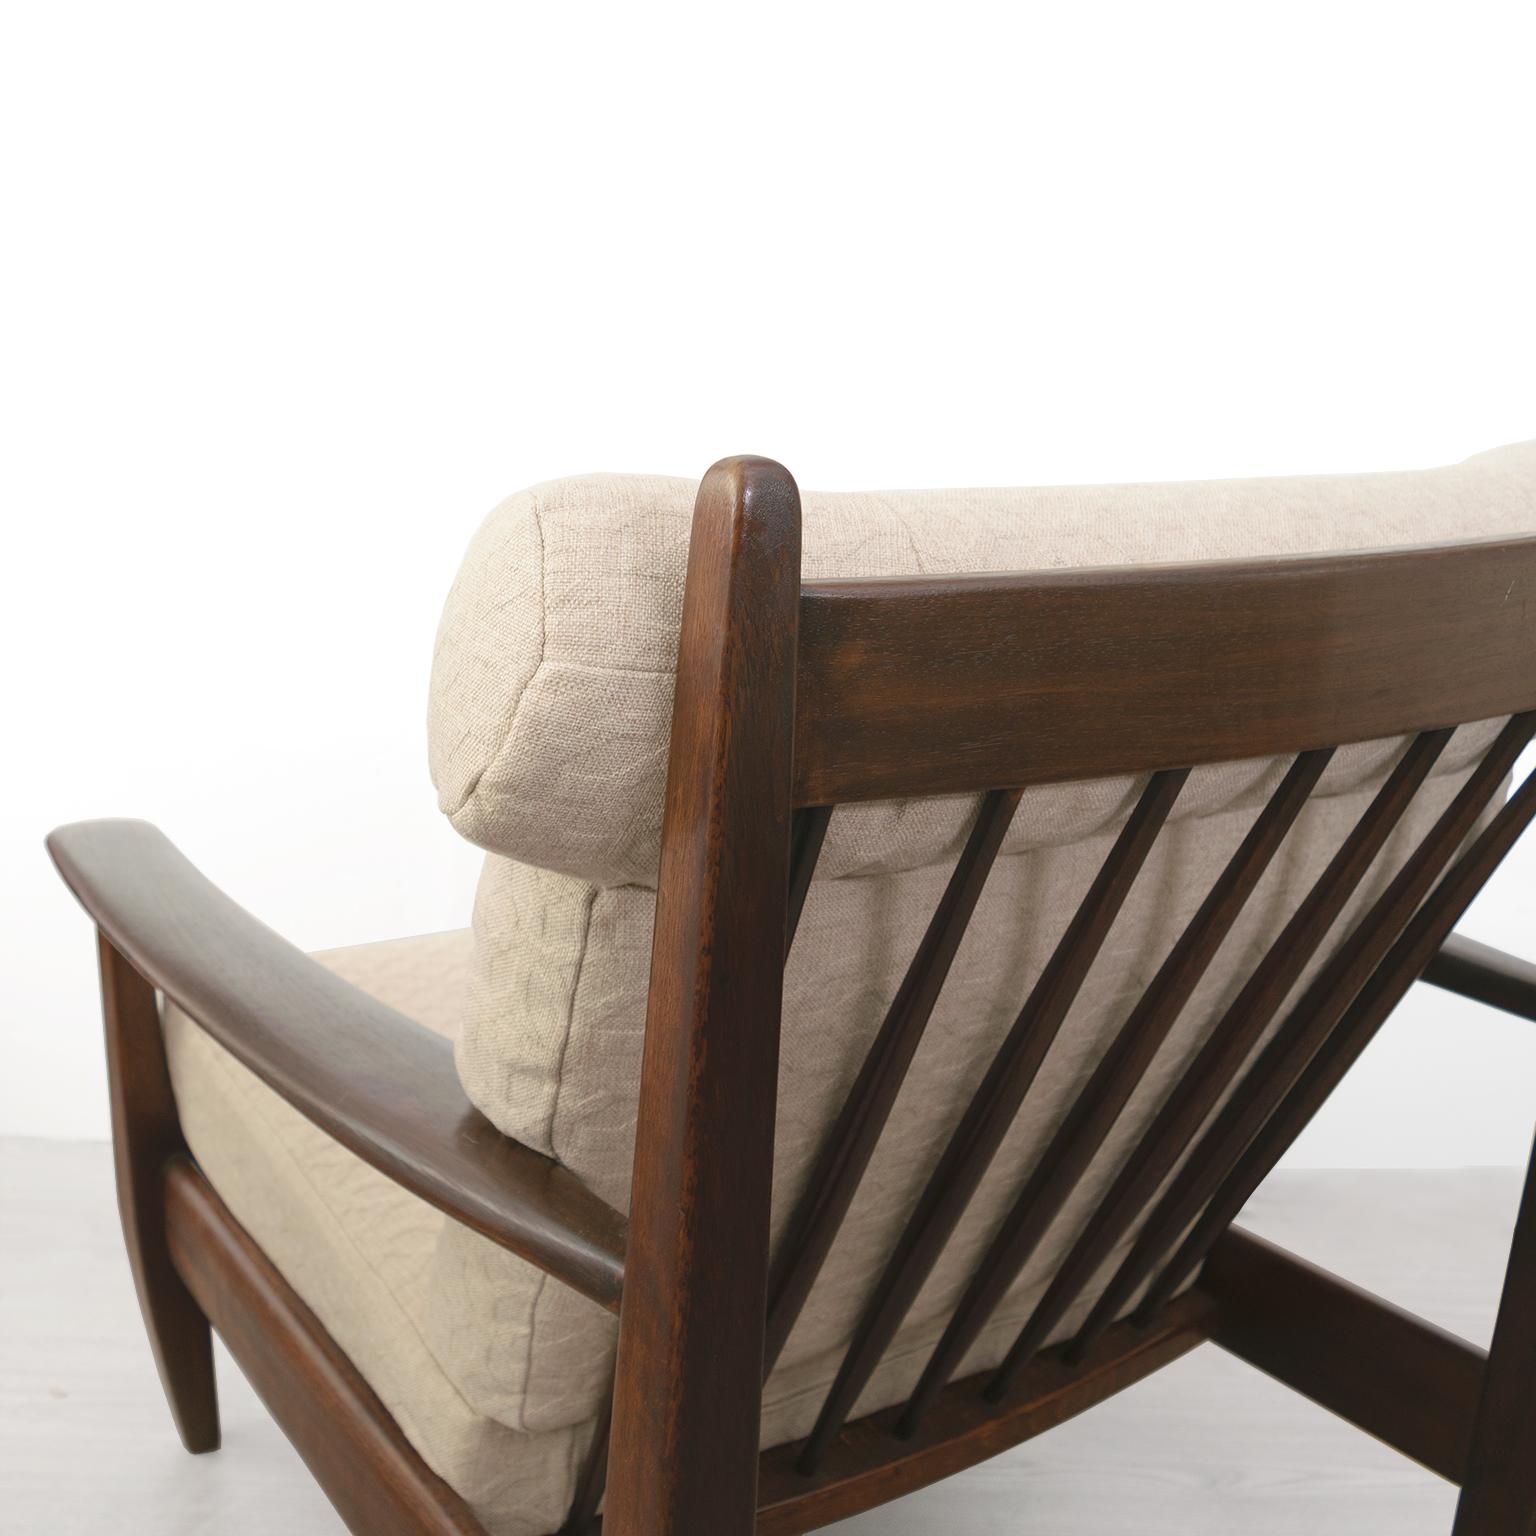 Upholstery Brazilian Pair of Lounge Chairs in Carved Solid Teak, 1960'S